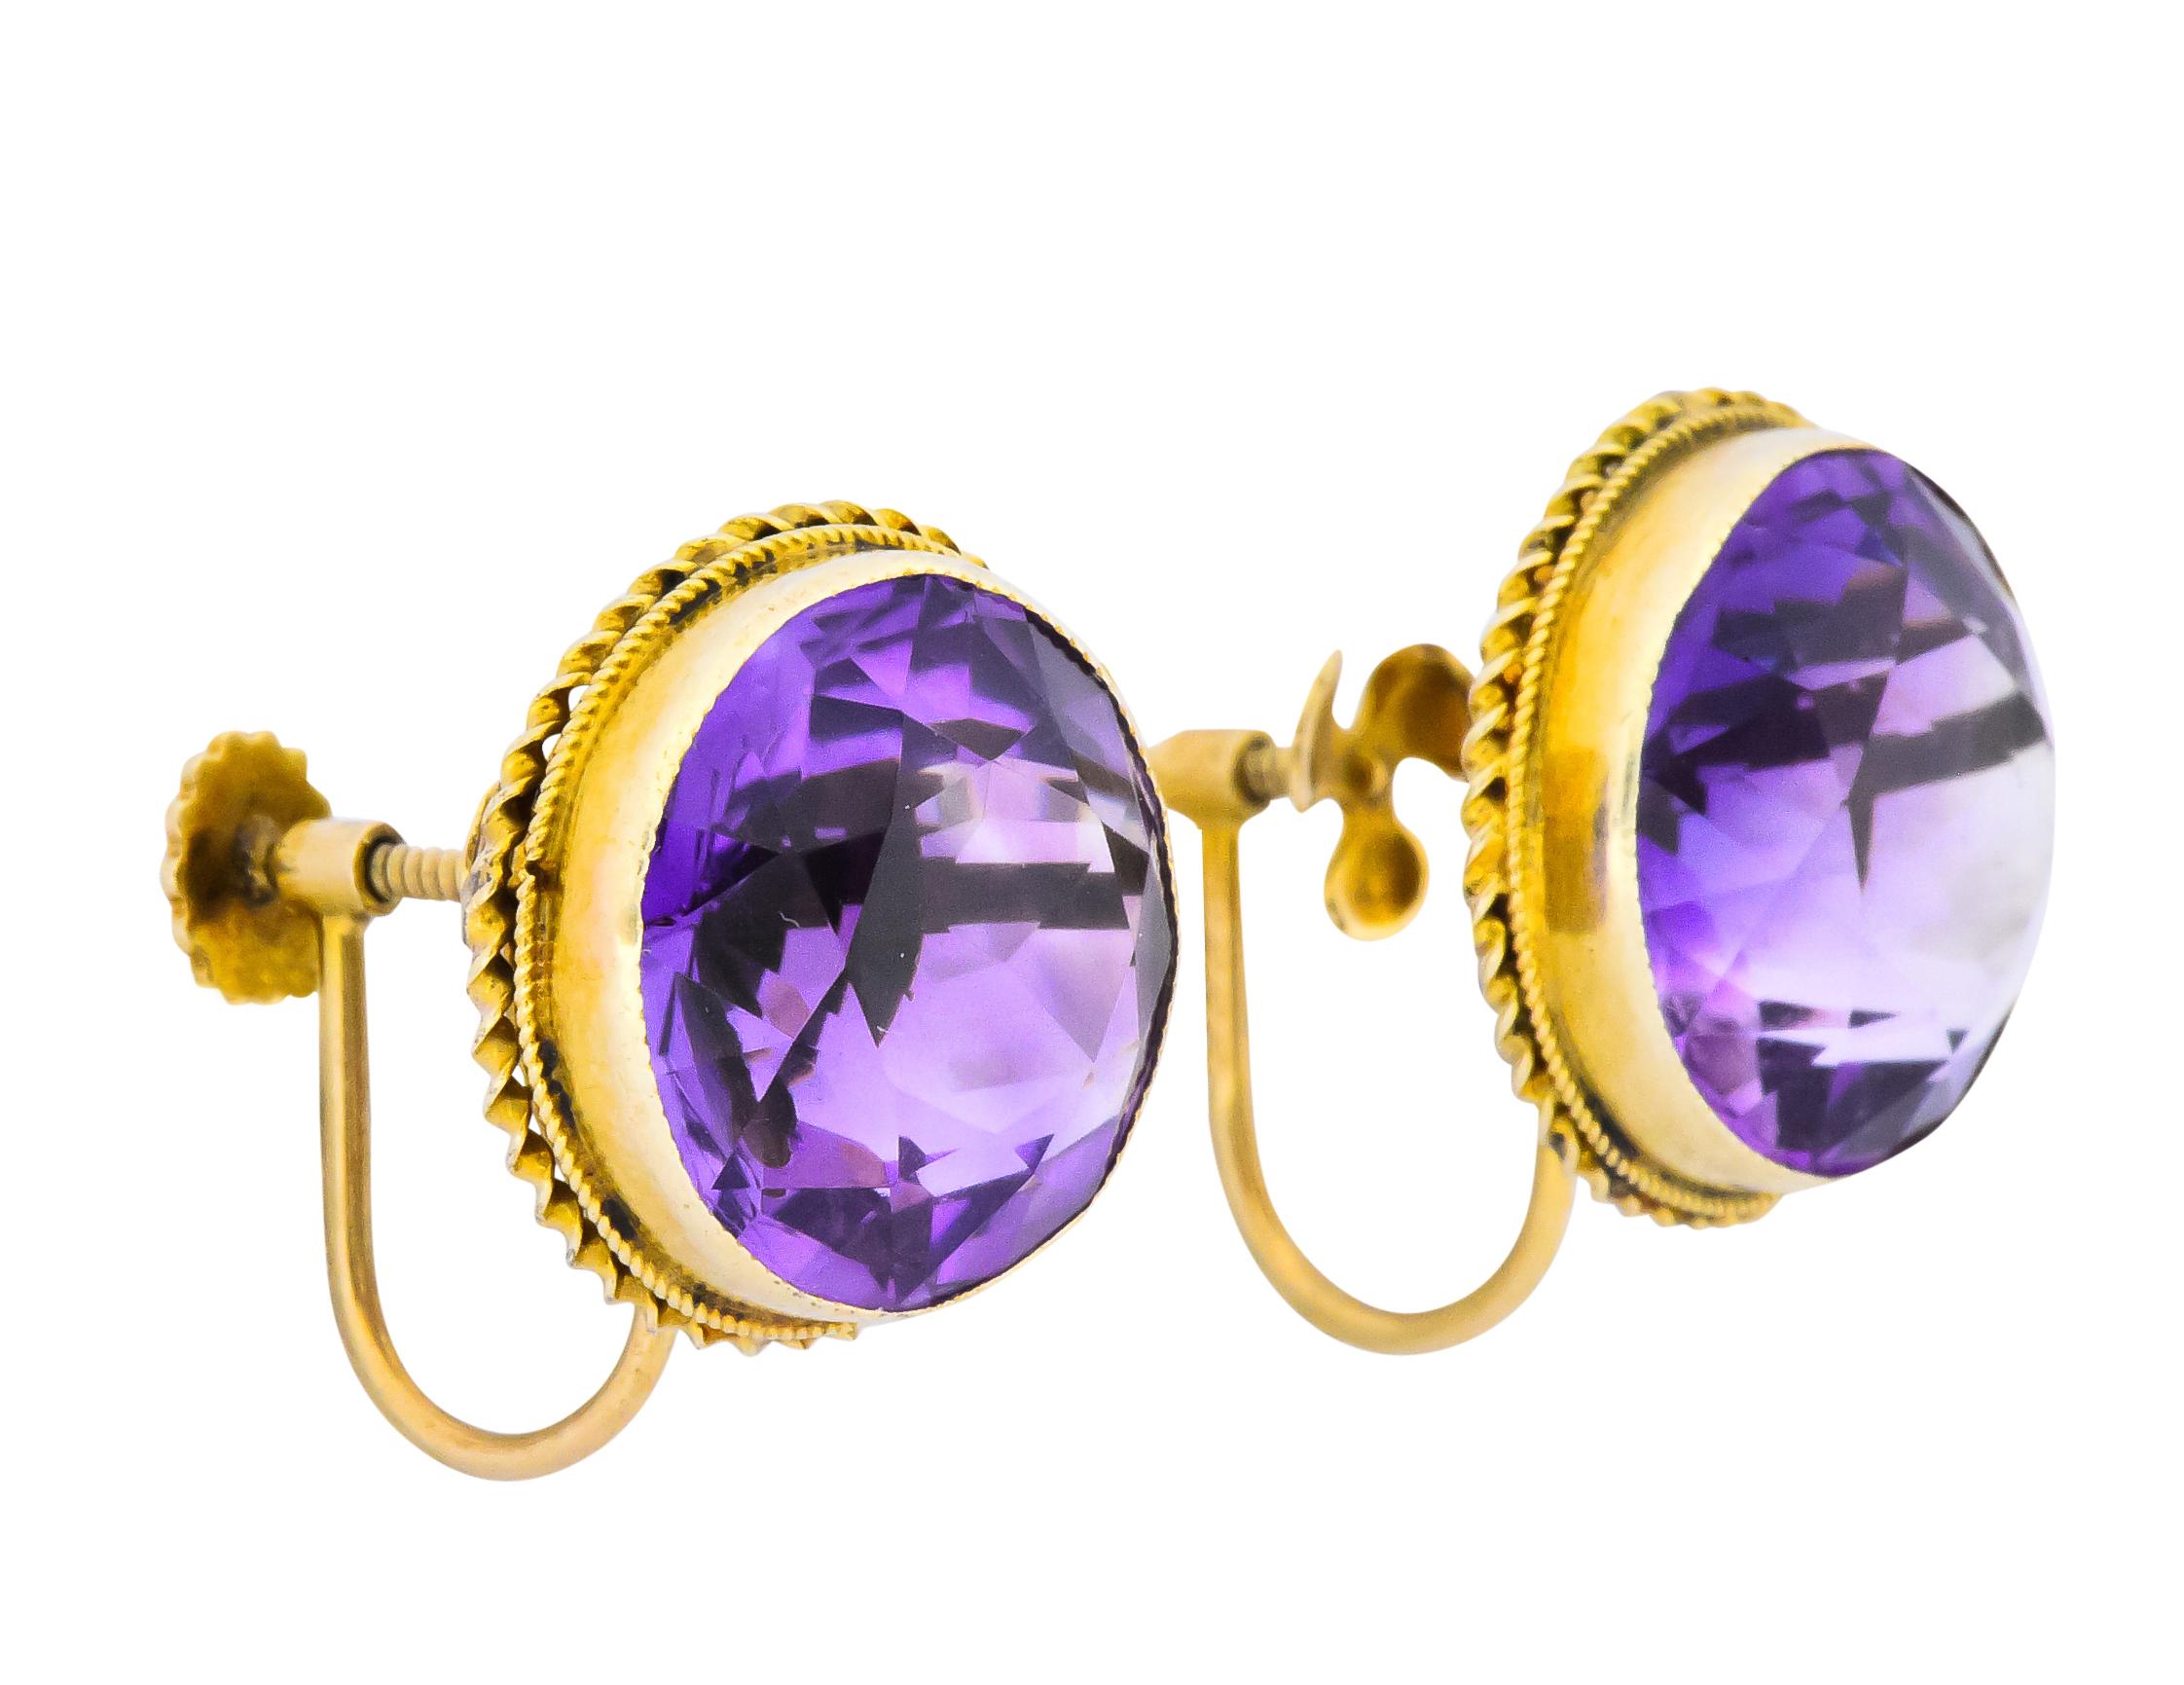 Each centering a modified round brilliant cut amethyst, weighing approximately 13.00 carats total

Both a rich royal purple and very well matched

Bezel set with twisted gold detail

Screw backs

Maker's mark for  Walter Lampl and stamped 14K

Circa